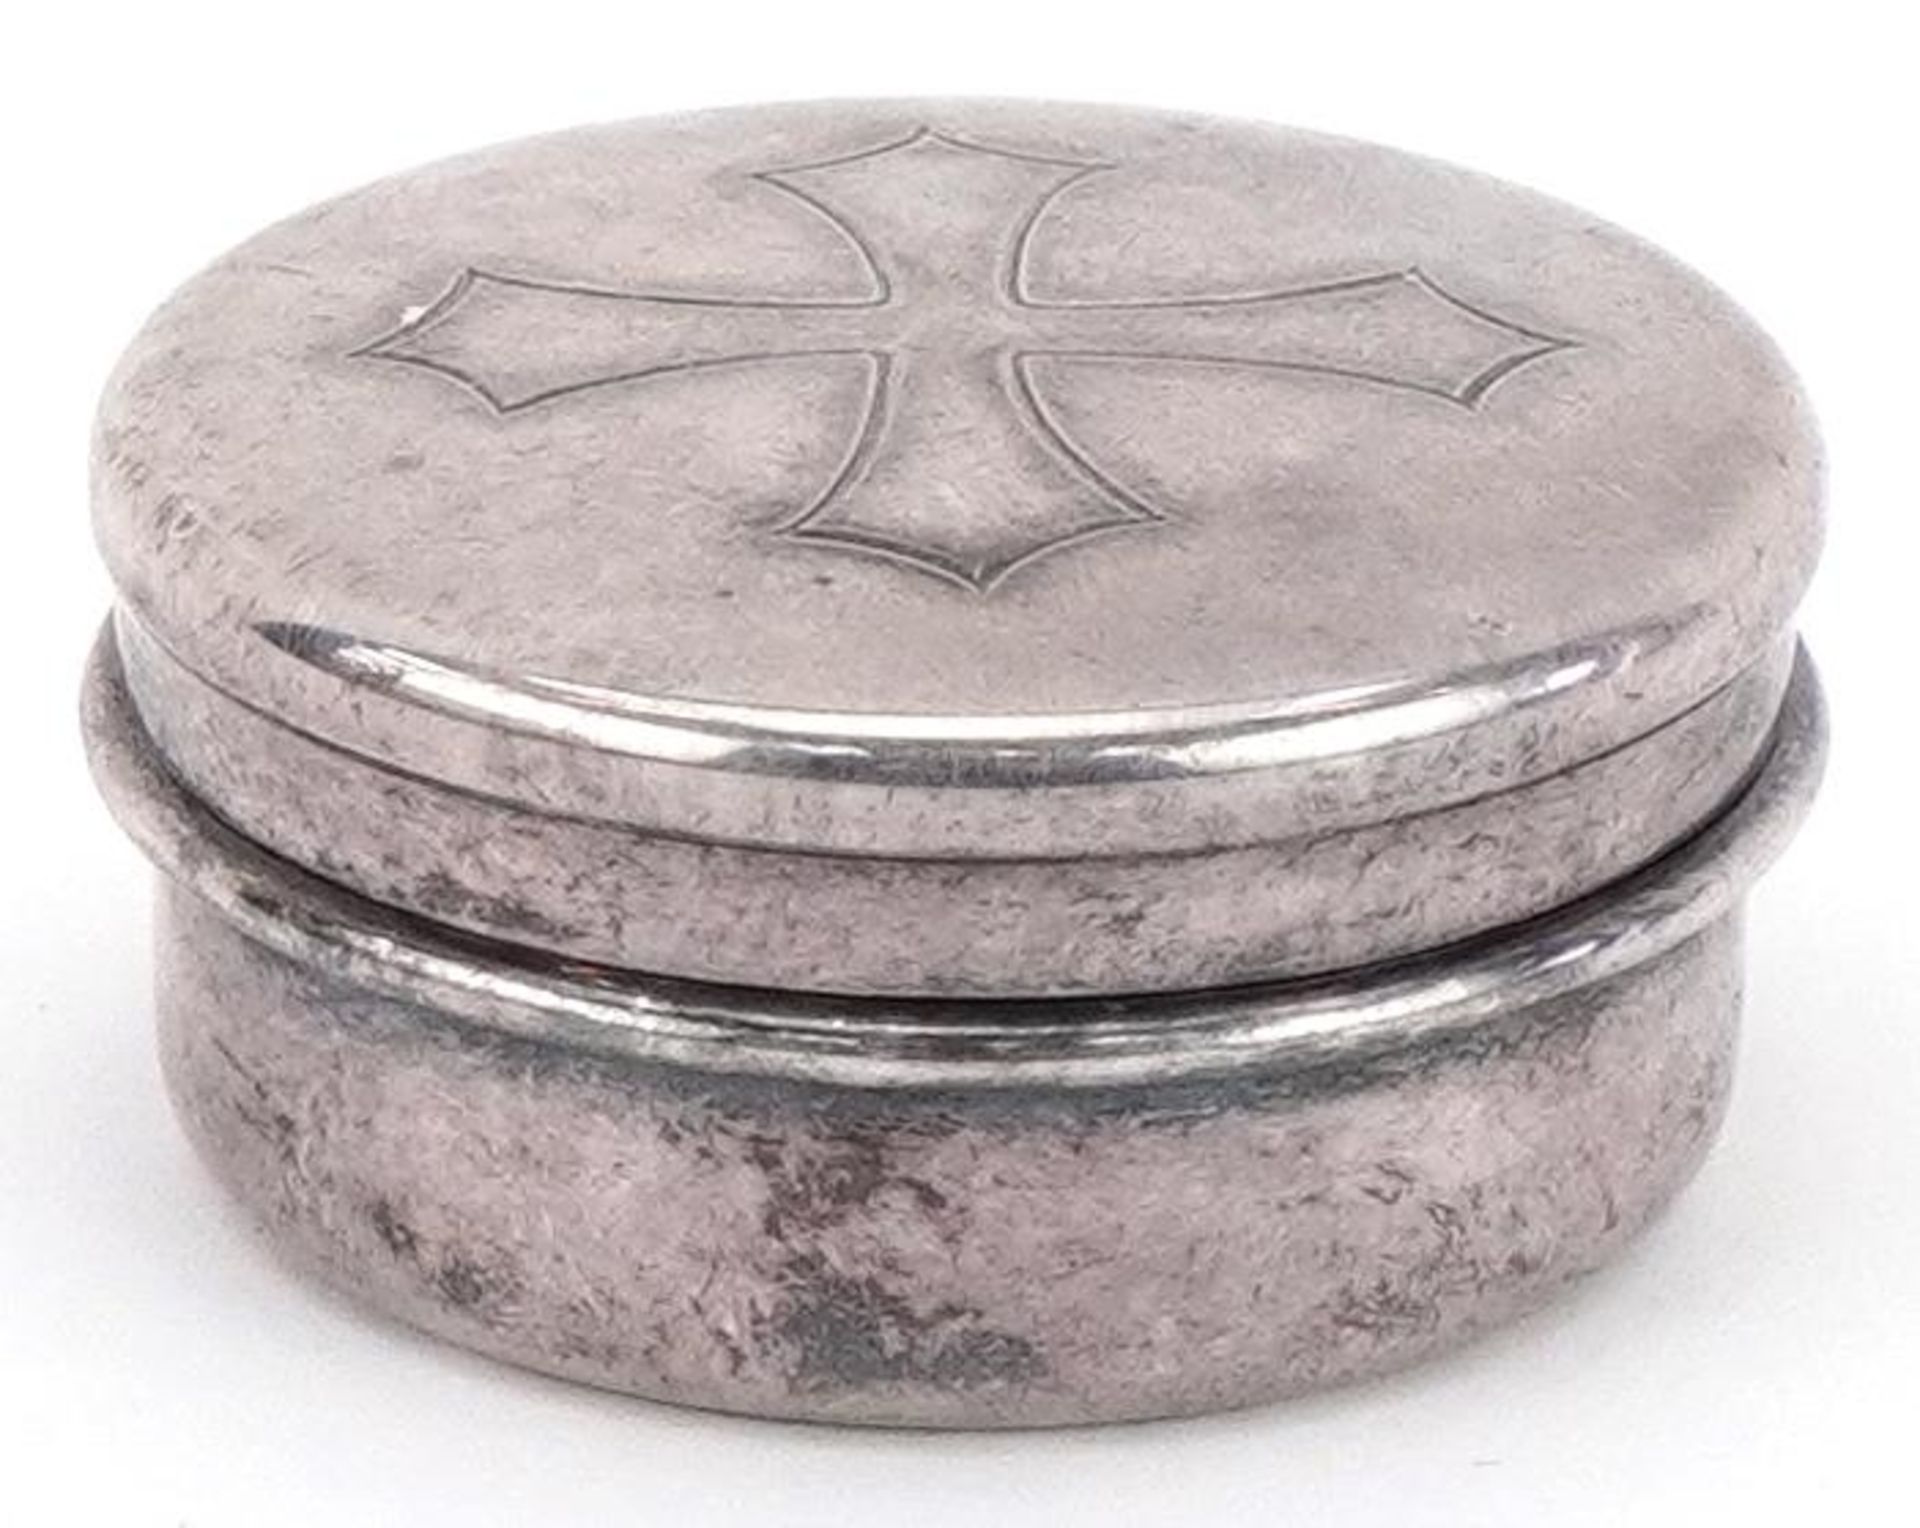 Wippell Mowbray Church Furnishers Ltd, ecclesiastical communion silver pyx engraved with a cross,